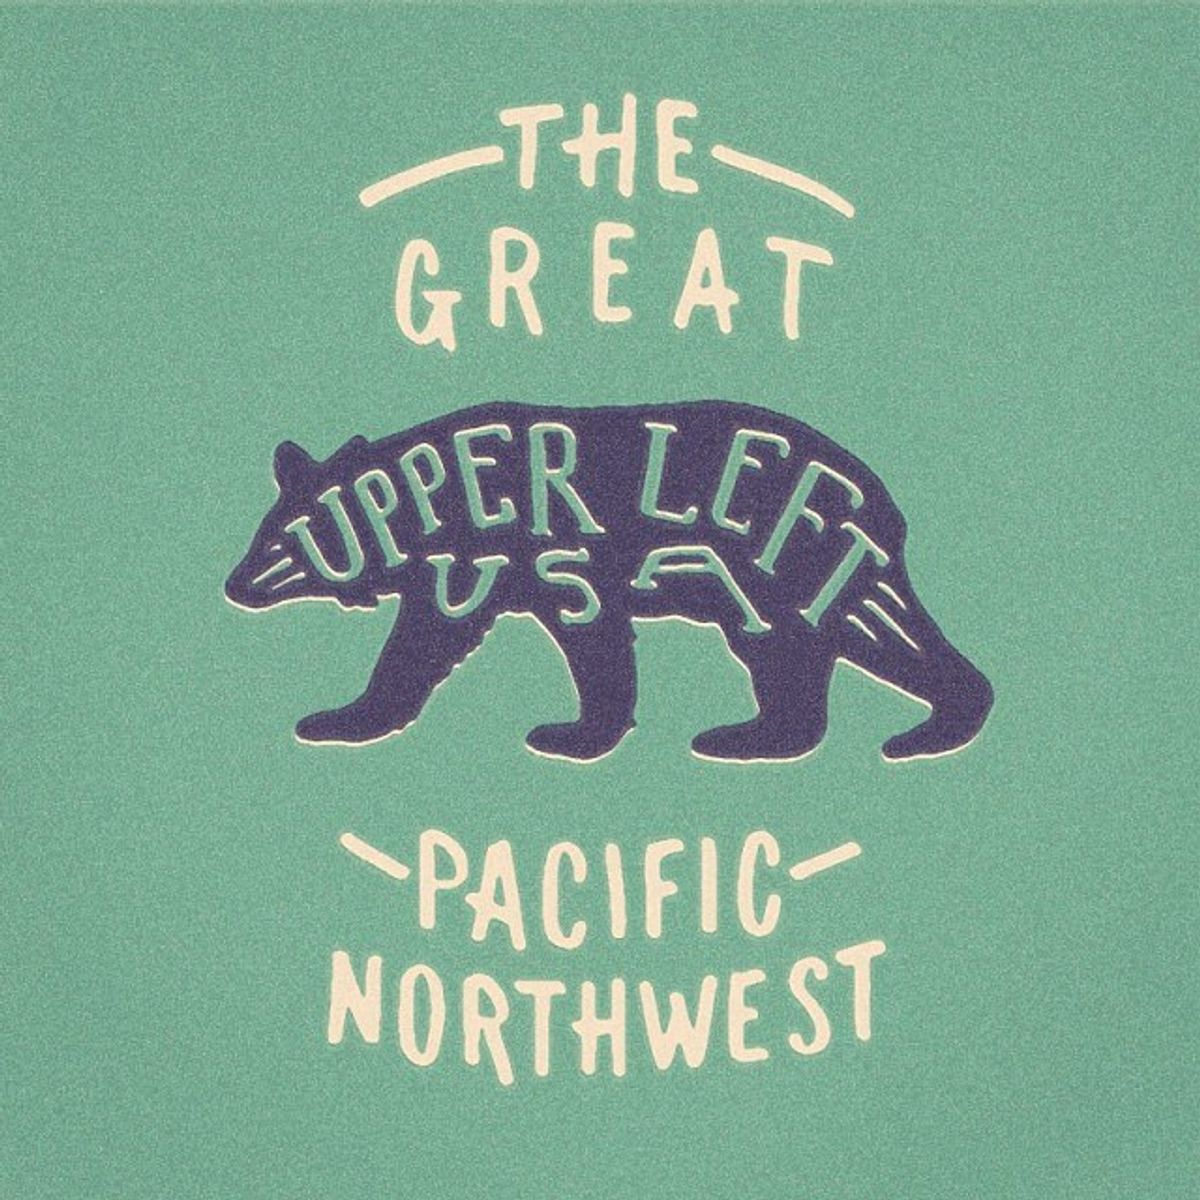 5 Reasons Why Summer In The Pacific Northwest Is The Best